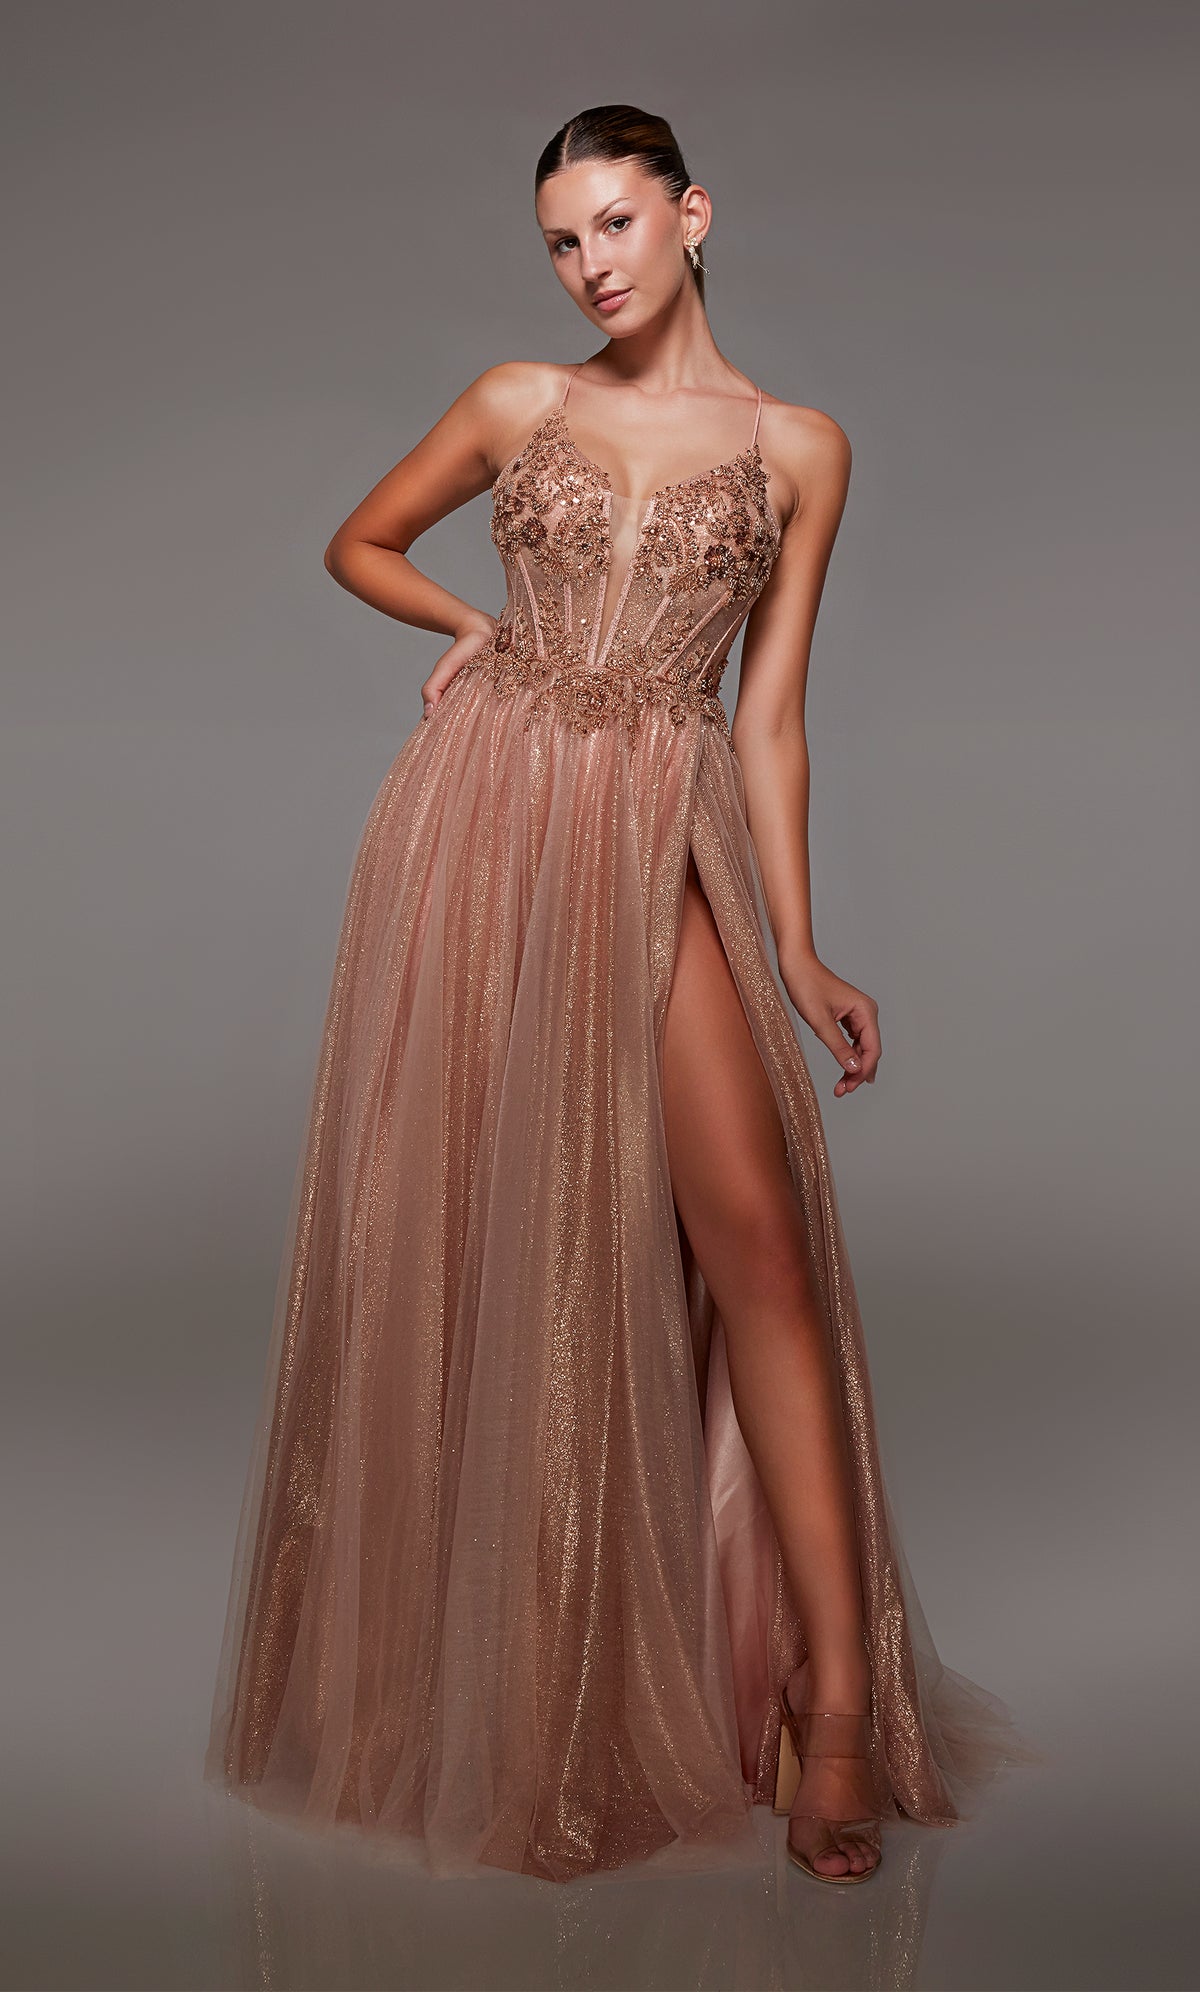 Gold glitter tulle corset dress with sheer beaded lace bodice, high slit, lace-up back, and an touch of train for an dreamy and enchanting vibe.